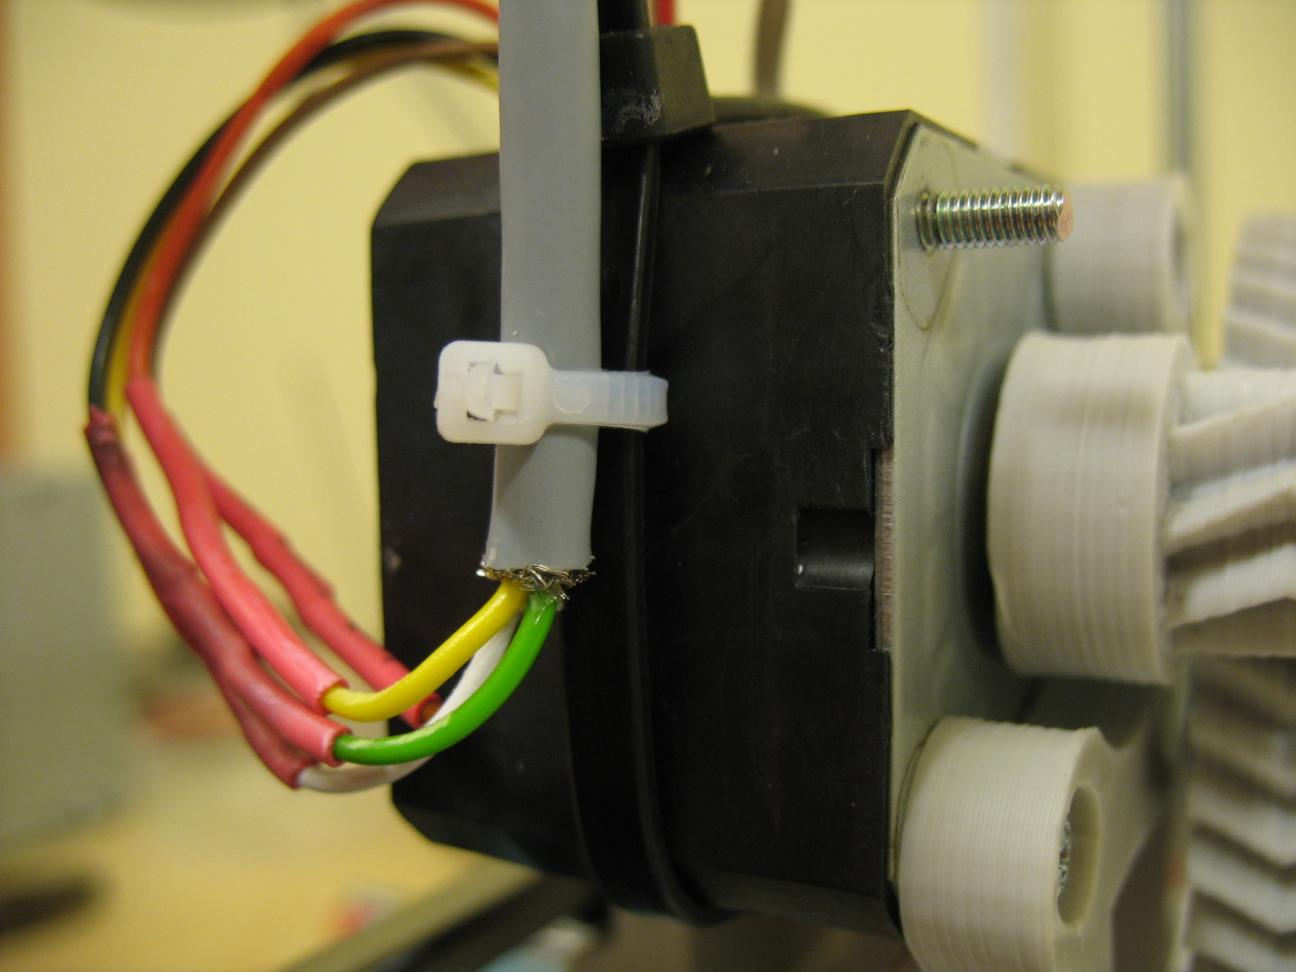 extruder's stepper motor and its wiring